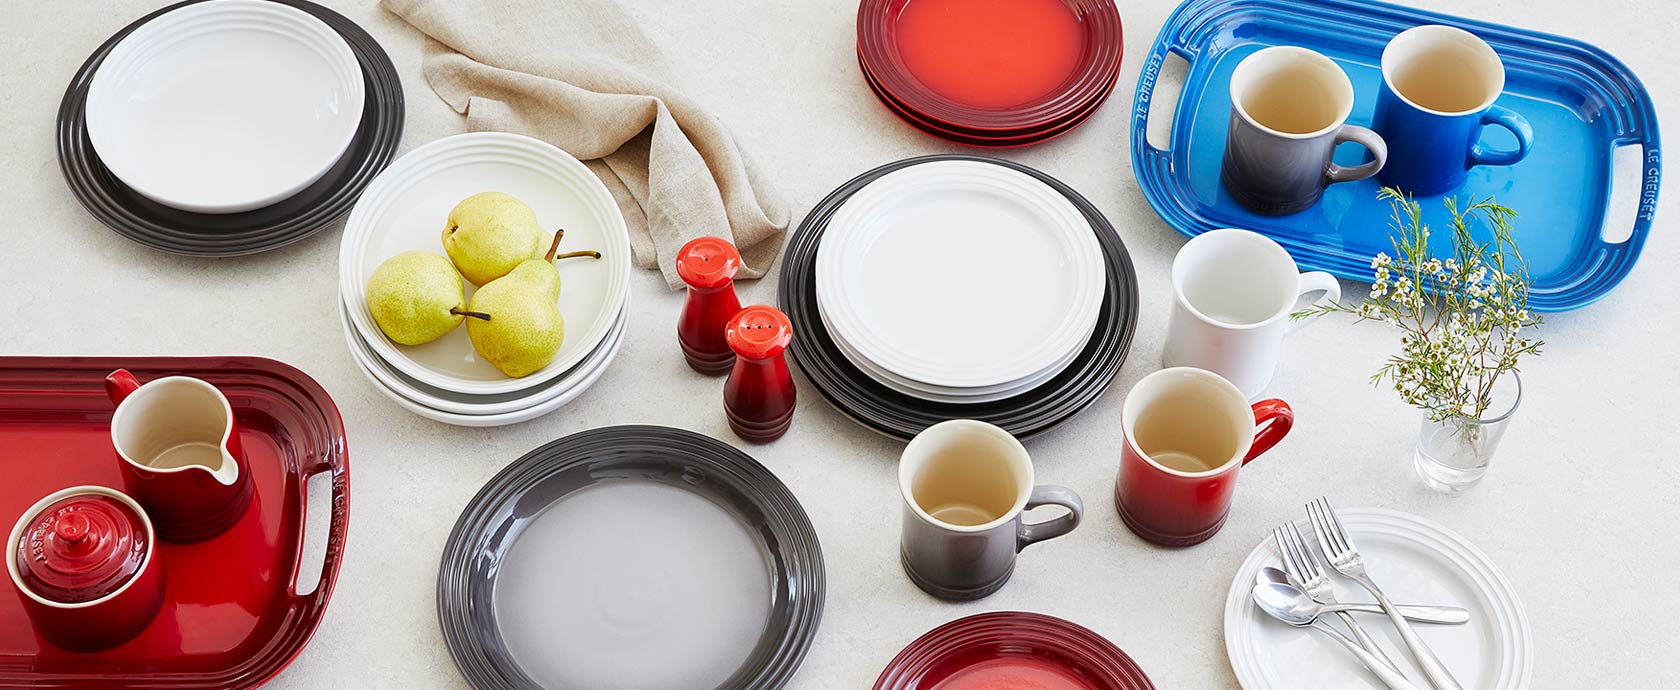 Le Creuset dinnerware in red, white, gray and blue colors